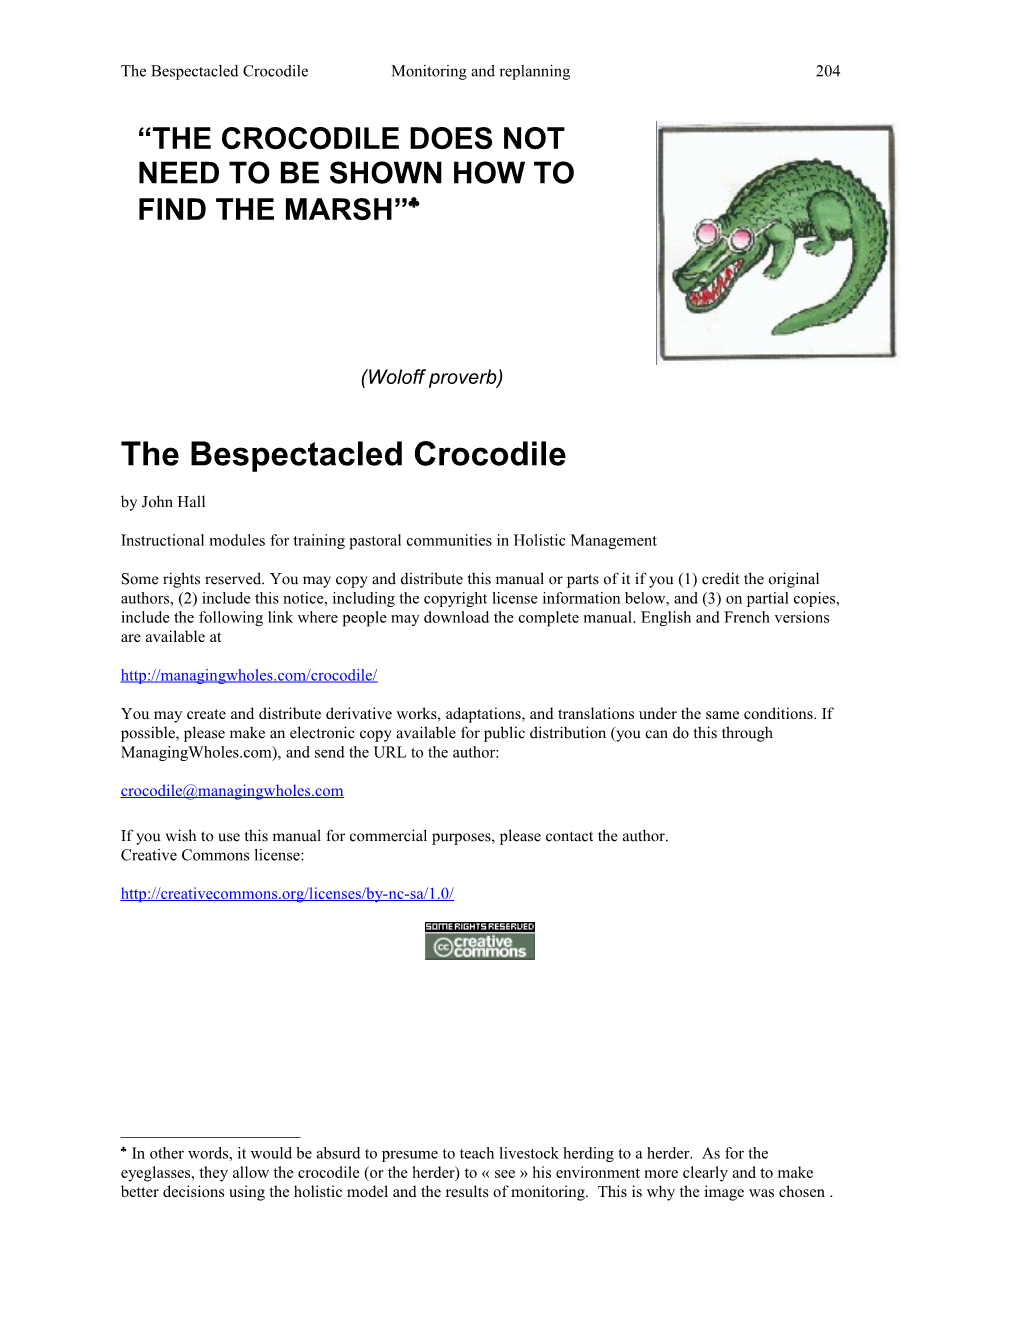 The Bespectacled Crocodilemonitoring and Replanning1